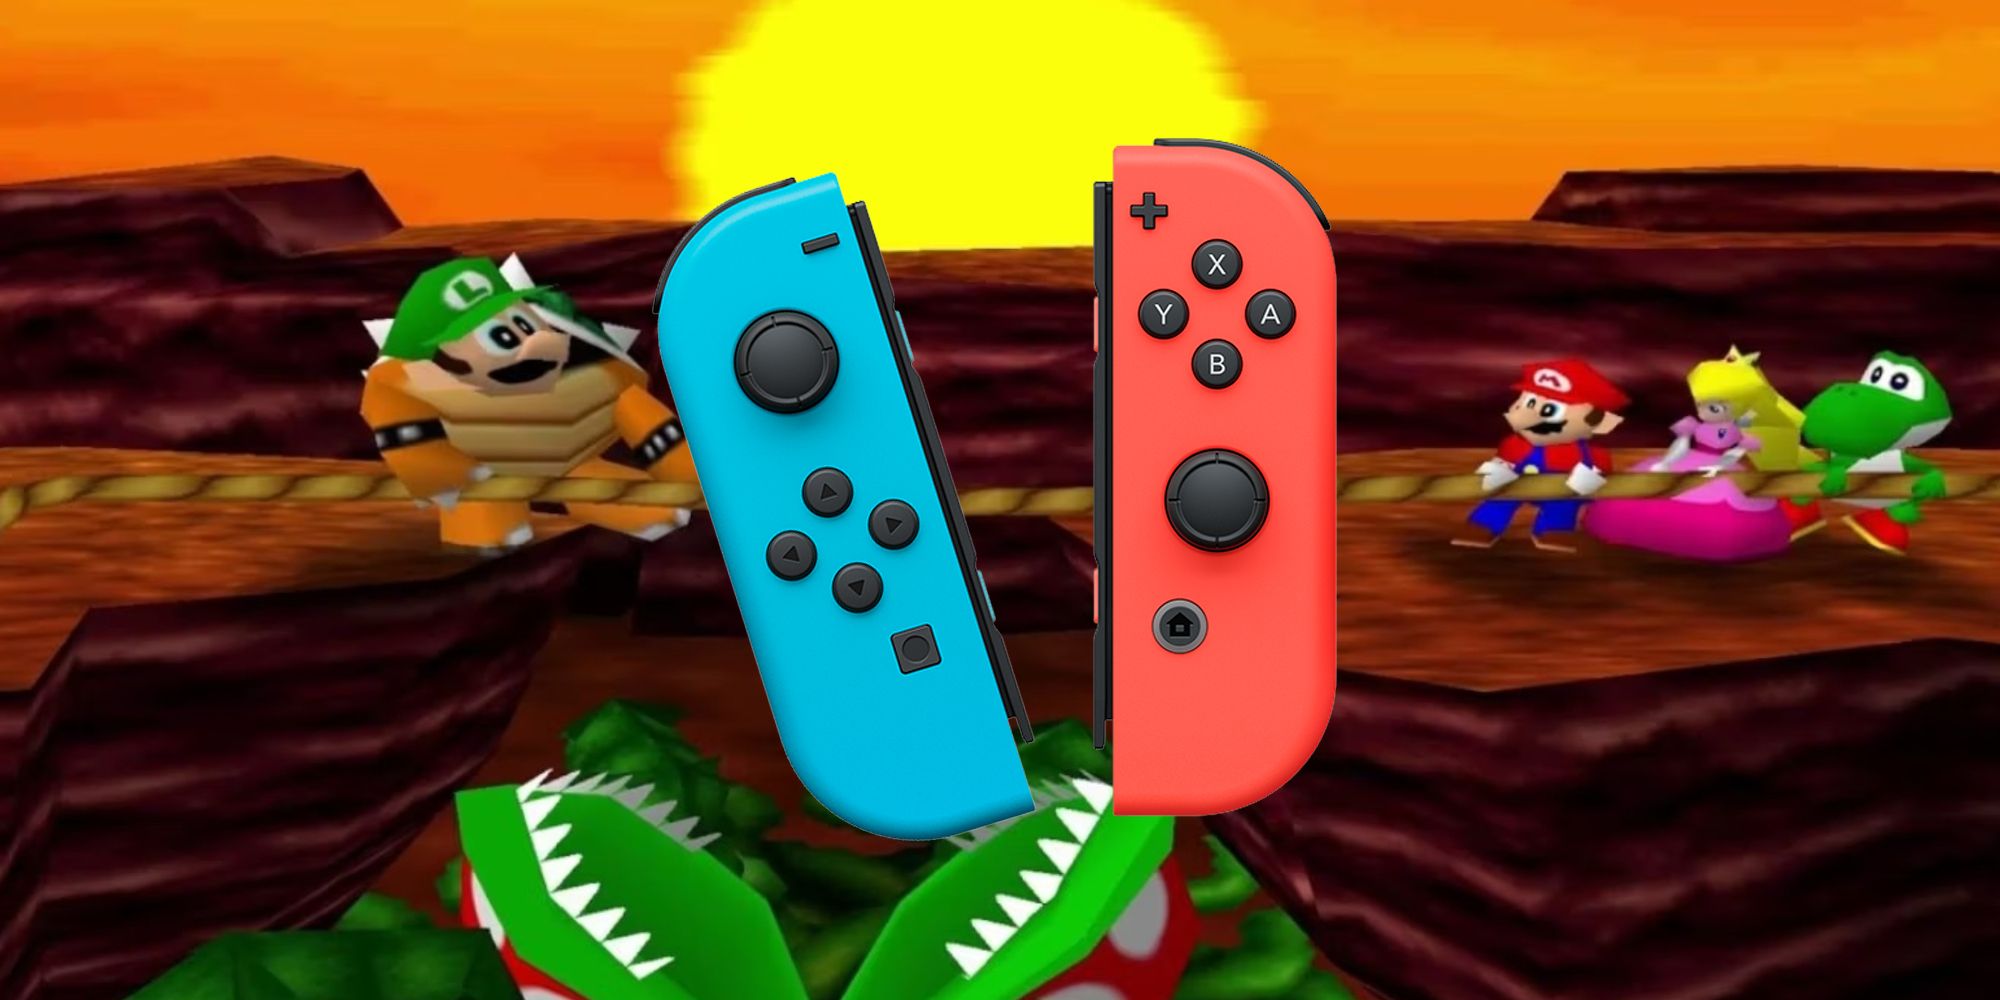 A pair of Nintendo Switch Joy-Cons in front of the Tug 'O War game from Mario Party